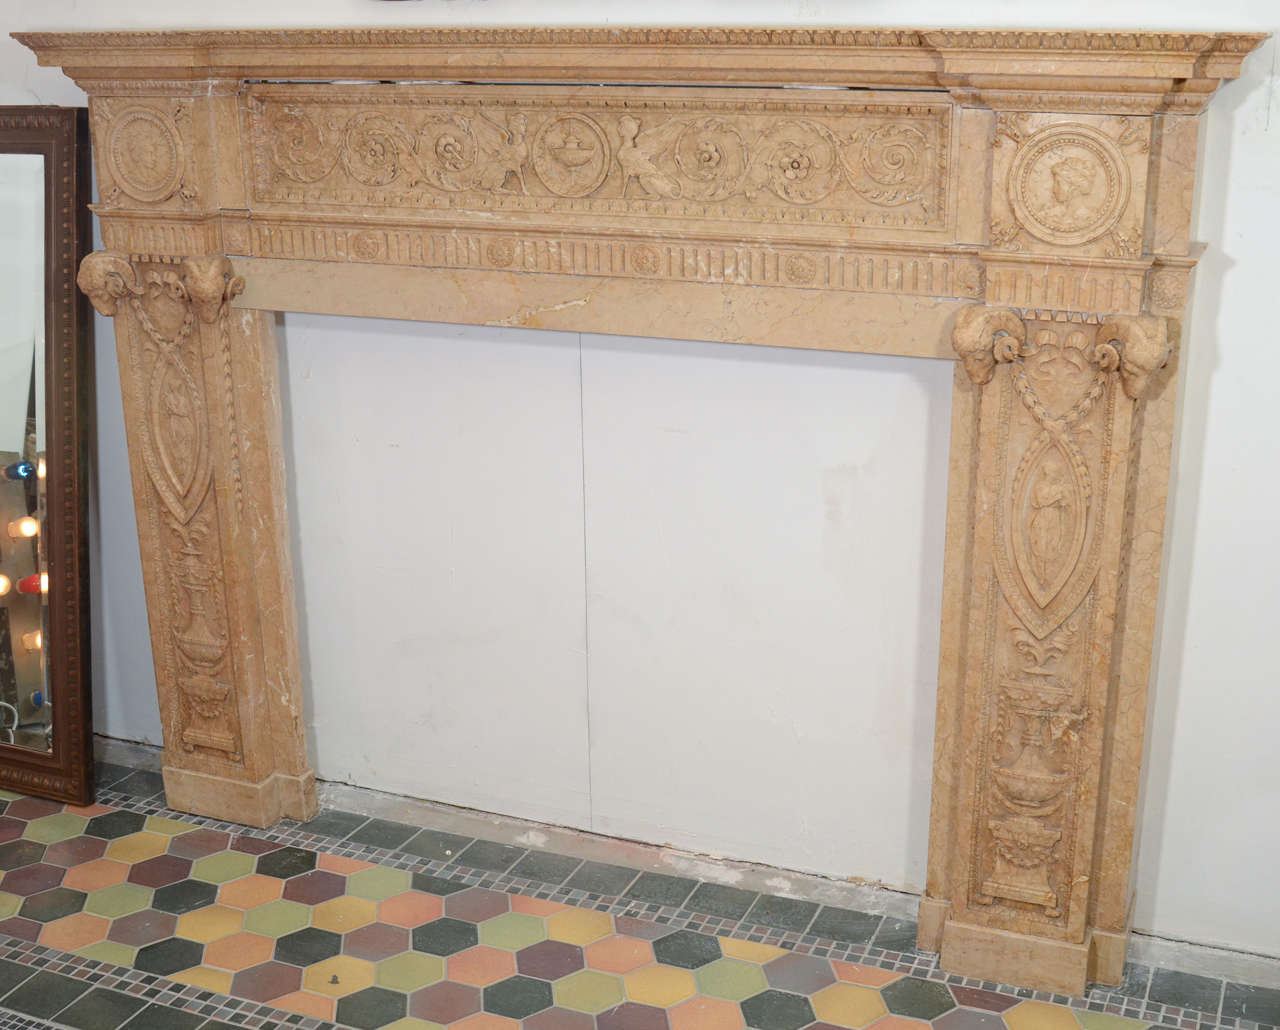 This highly detailed English sienna carved marble mantel with rams head detail was reclaimed from the Vanderbilt mansion on Sutton Place. It is unusual for an English mantel, because the center plaque is carved out of a block, as opposed to being